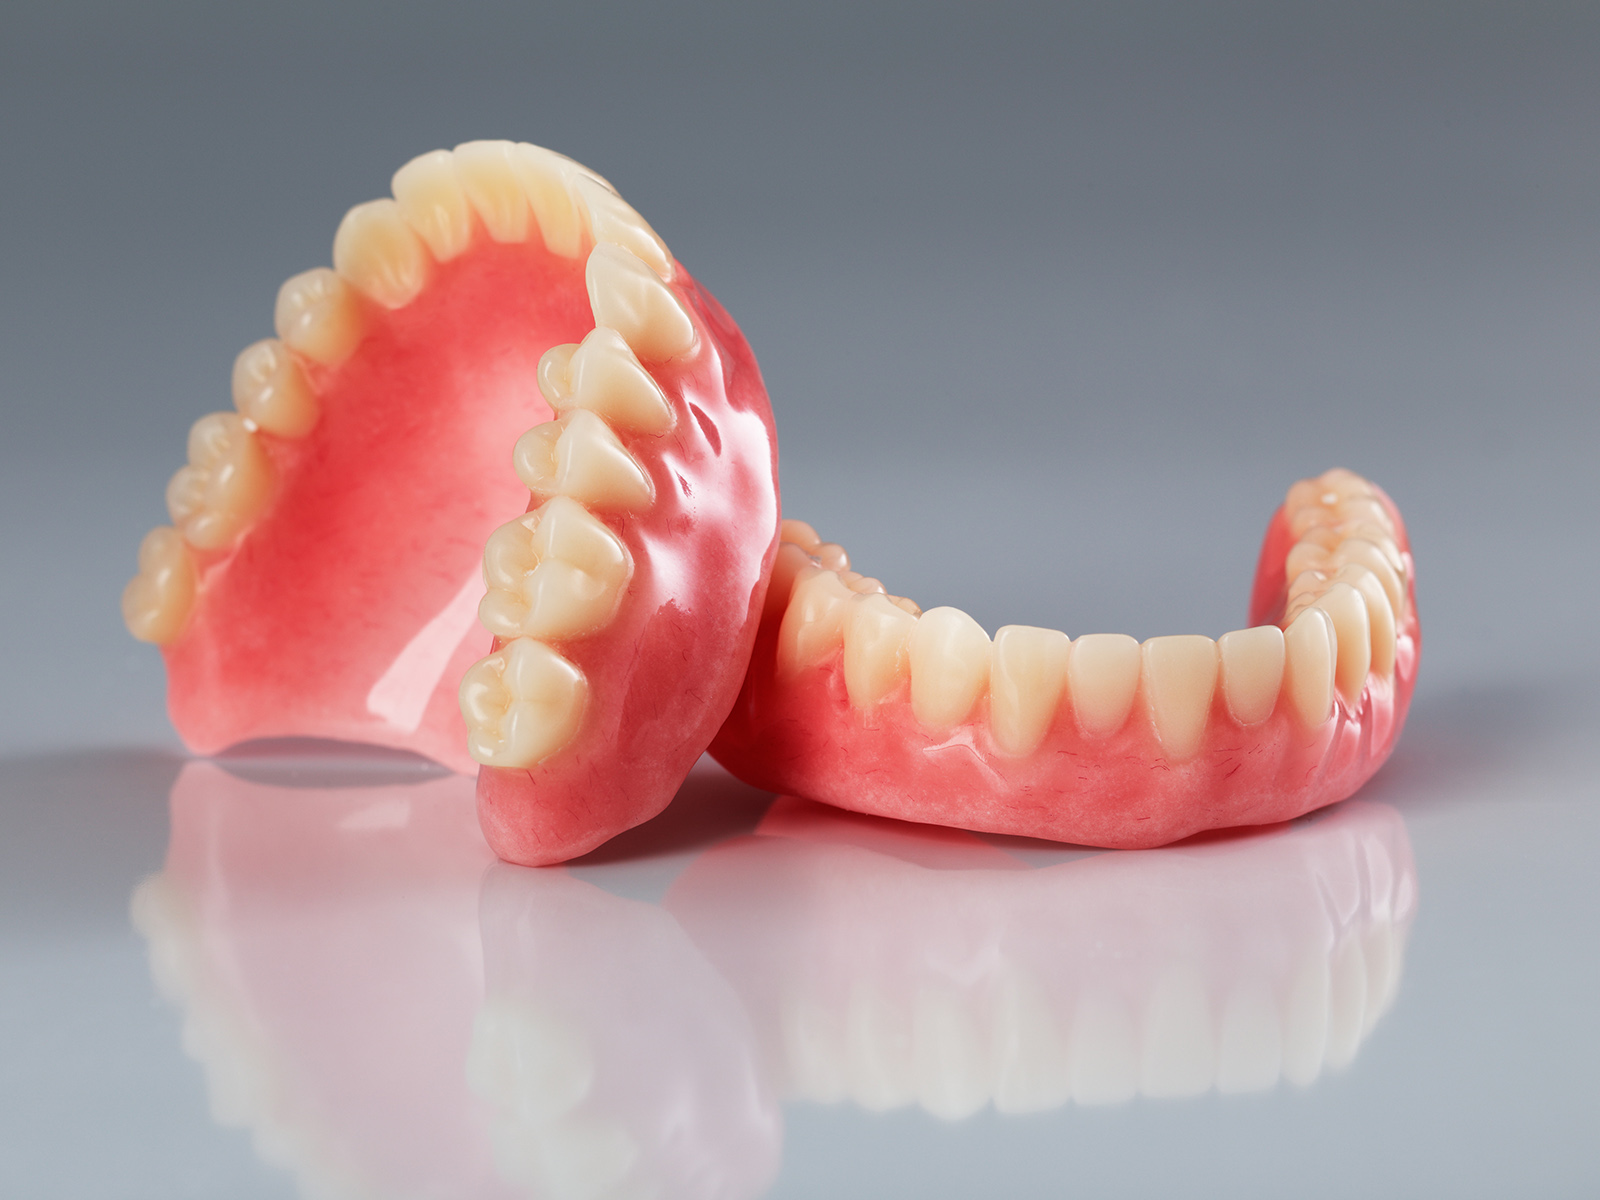 What Is The Difference Between Dentures And False Teeth?